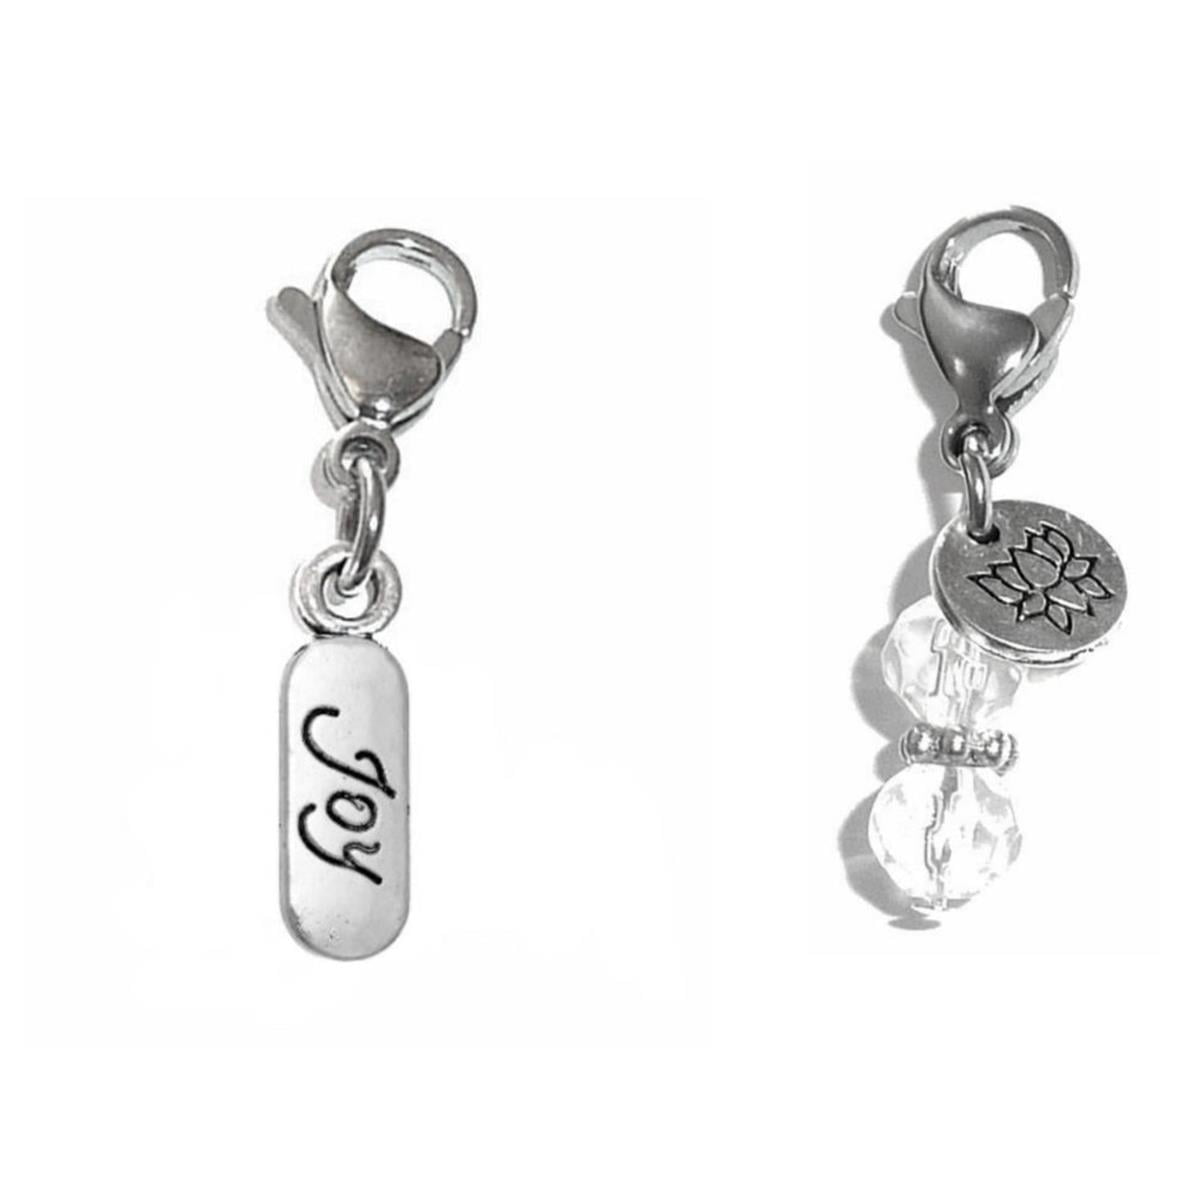 Charms Clip On - Perfect For Bracelet Or Necklace, Zipper Pull Charm, Bag  Or Purse Charm Easy To Use DIY Charms - Joy Clip On Charm